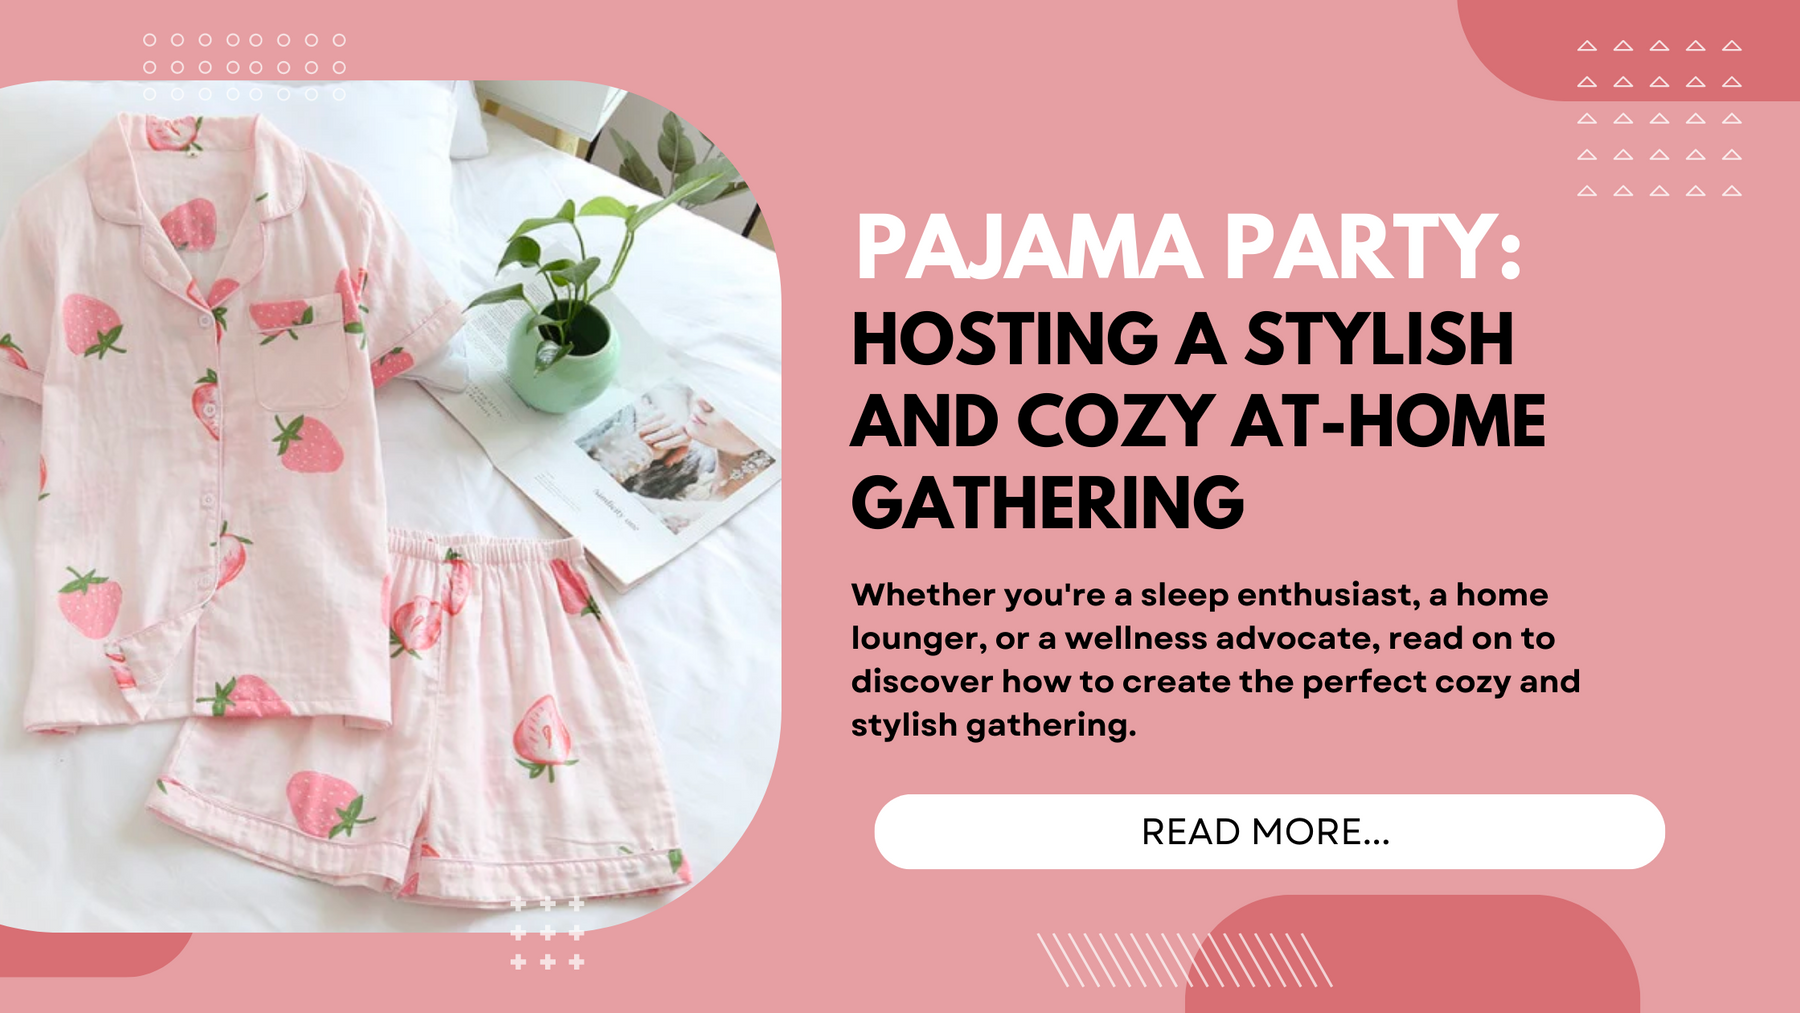 Pajama Party: Hosting a Stylish and Cozy At-Home Gathering